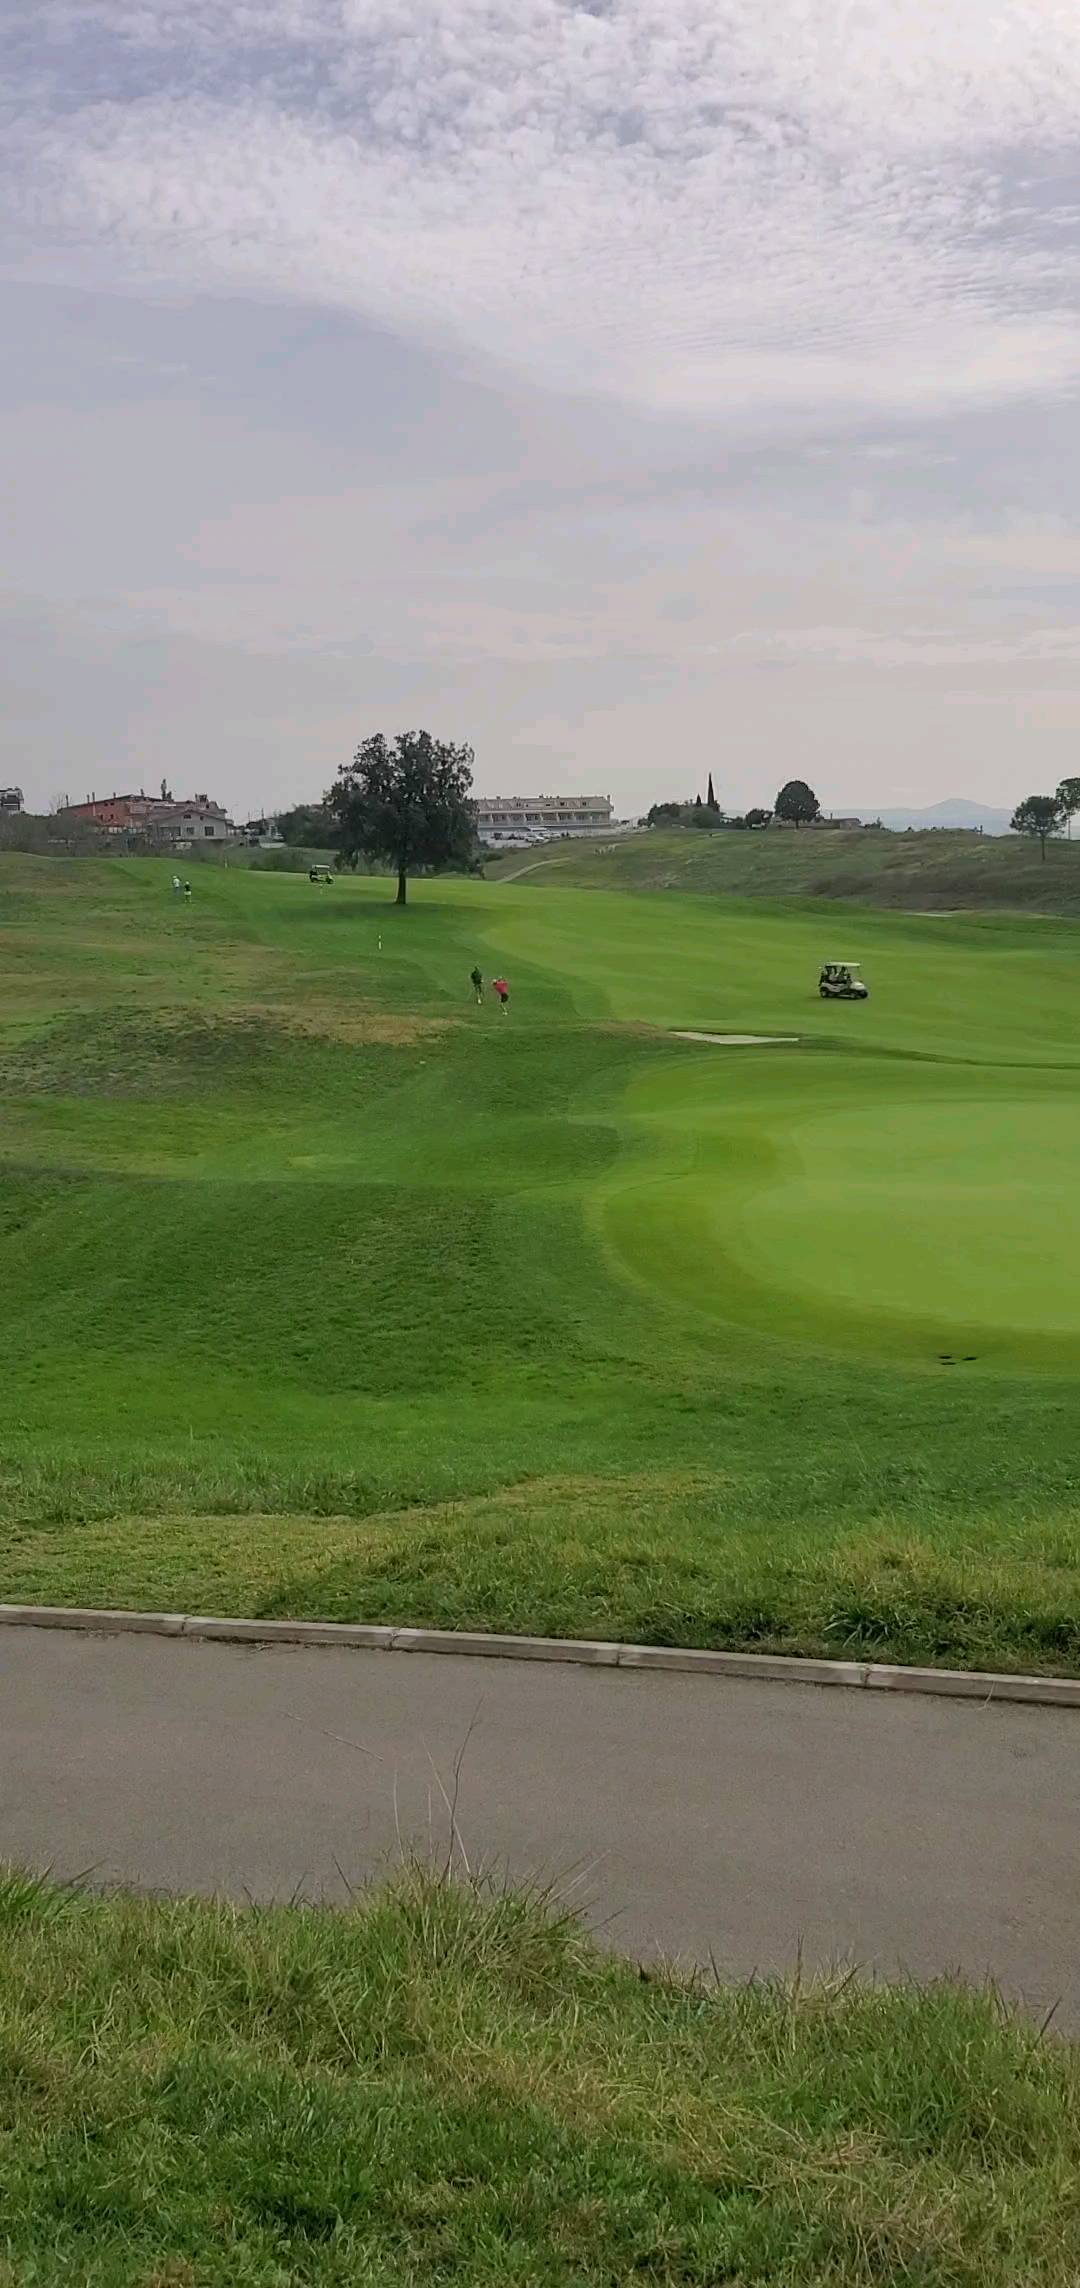 Marco Simone Golf Club. This will be the site of Ryder Cup 2023. It will be a bombers delight as the course isn't as long as normal tour lengths. Rough will have to increase and fairways narrowed. The Director of Golf hinted to slow greens to help the European Team. Good Luck with that! #Golf #golfcontentnetwork #instagolf #instagolfer #golfswing #golflife #golfinitaly #italy #Italian countryside #Rome #rydercup #rydercup2023 #golftravel #USA #marcosimonegolfclub #travel